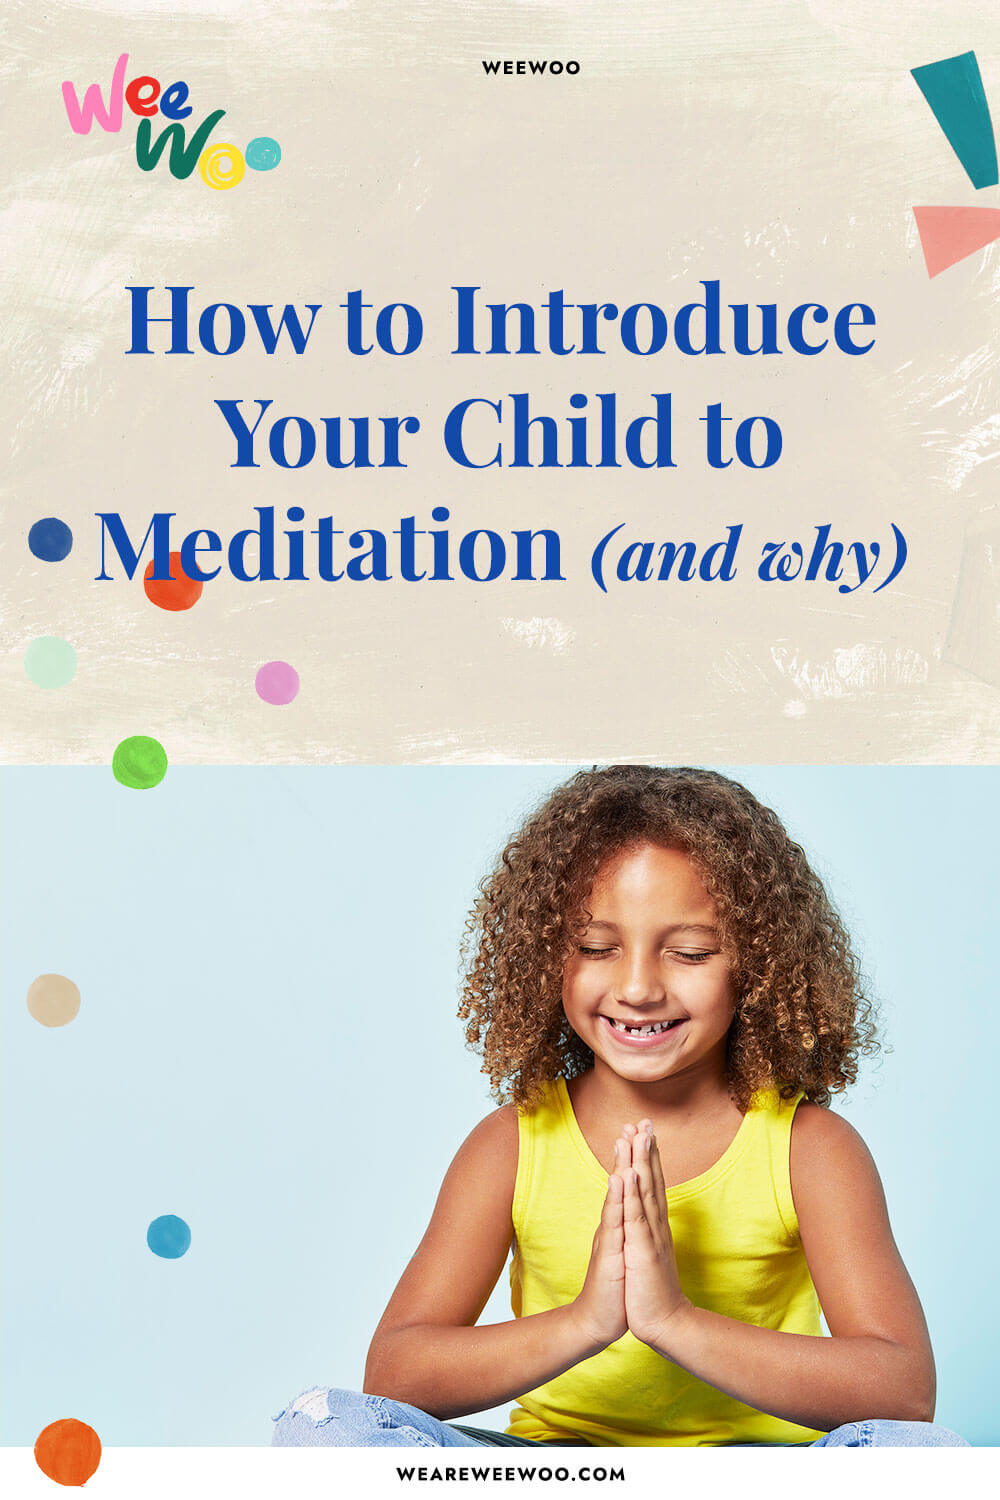 How to Introduce Your Child to Meditation (and why)